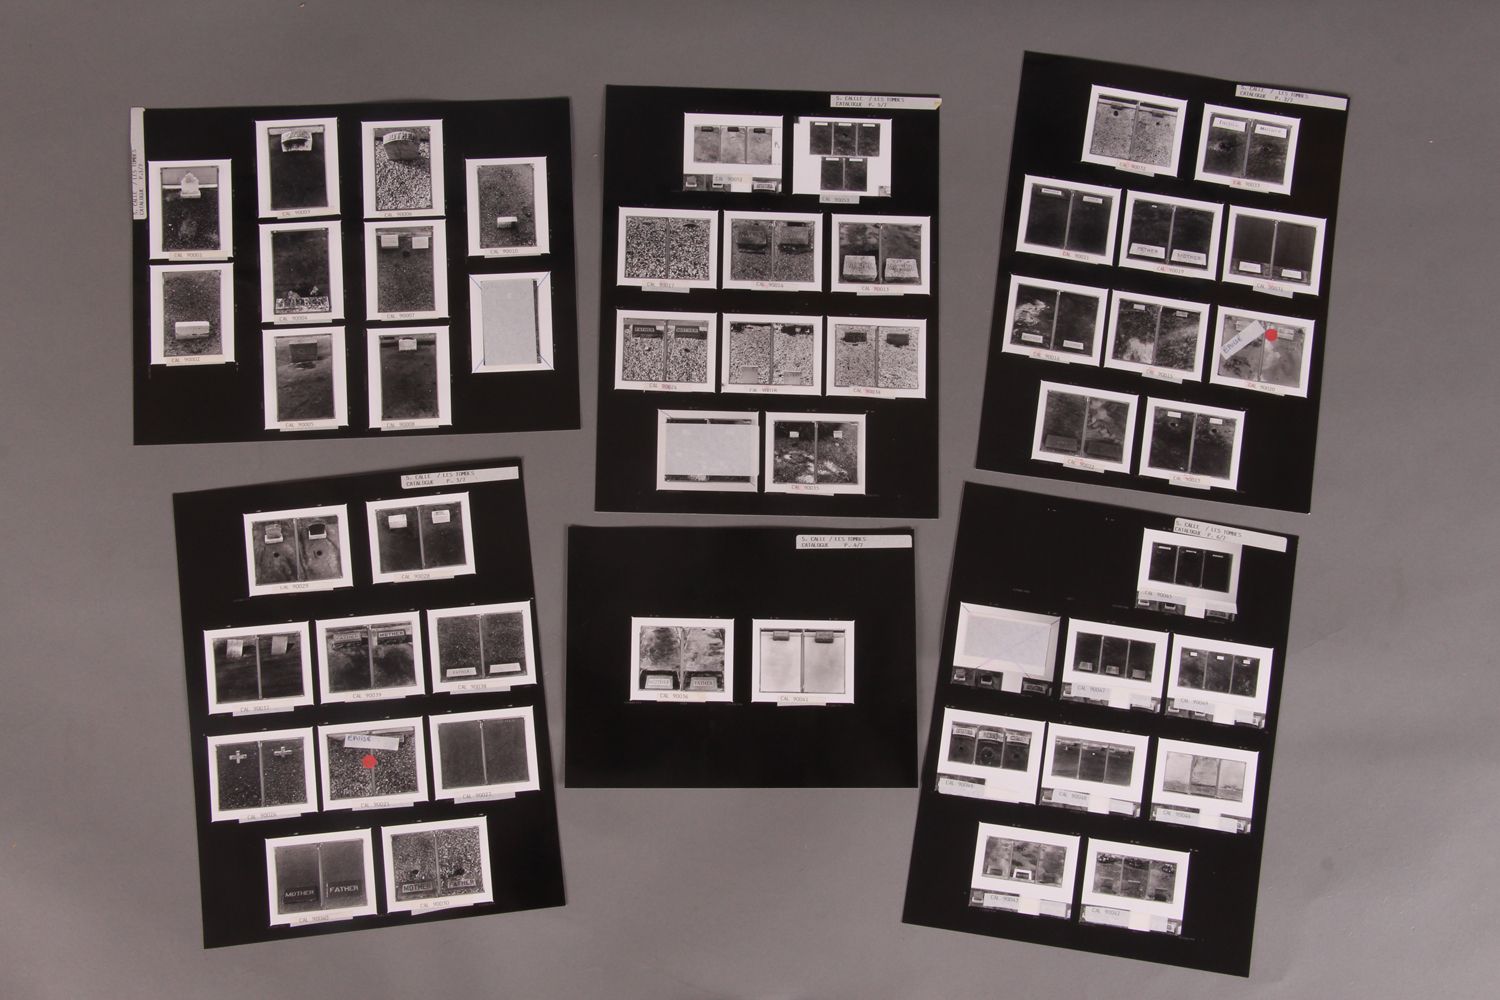 Sophie CALLE. "Les tombes. 1990. Gallery plates" Seven A4 photographic plates fr&hellip;